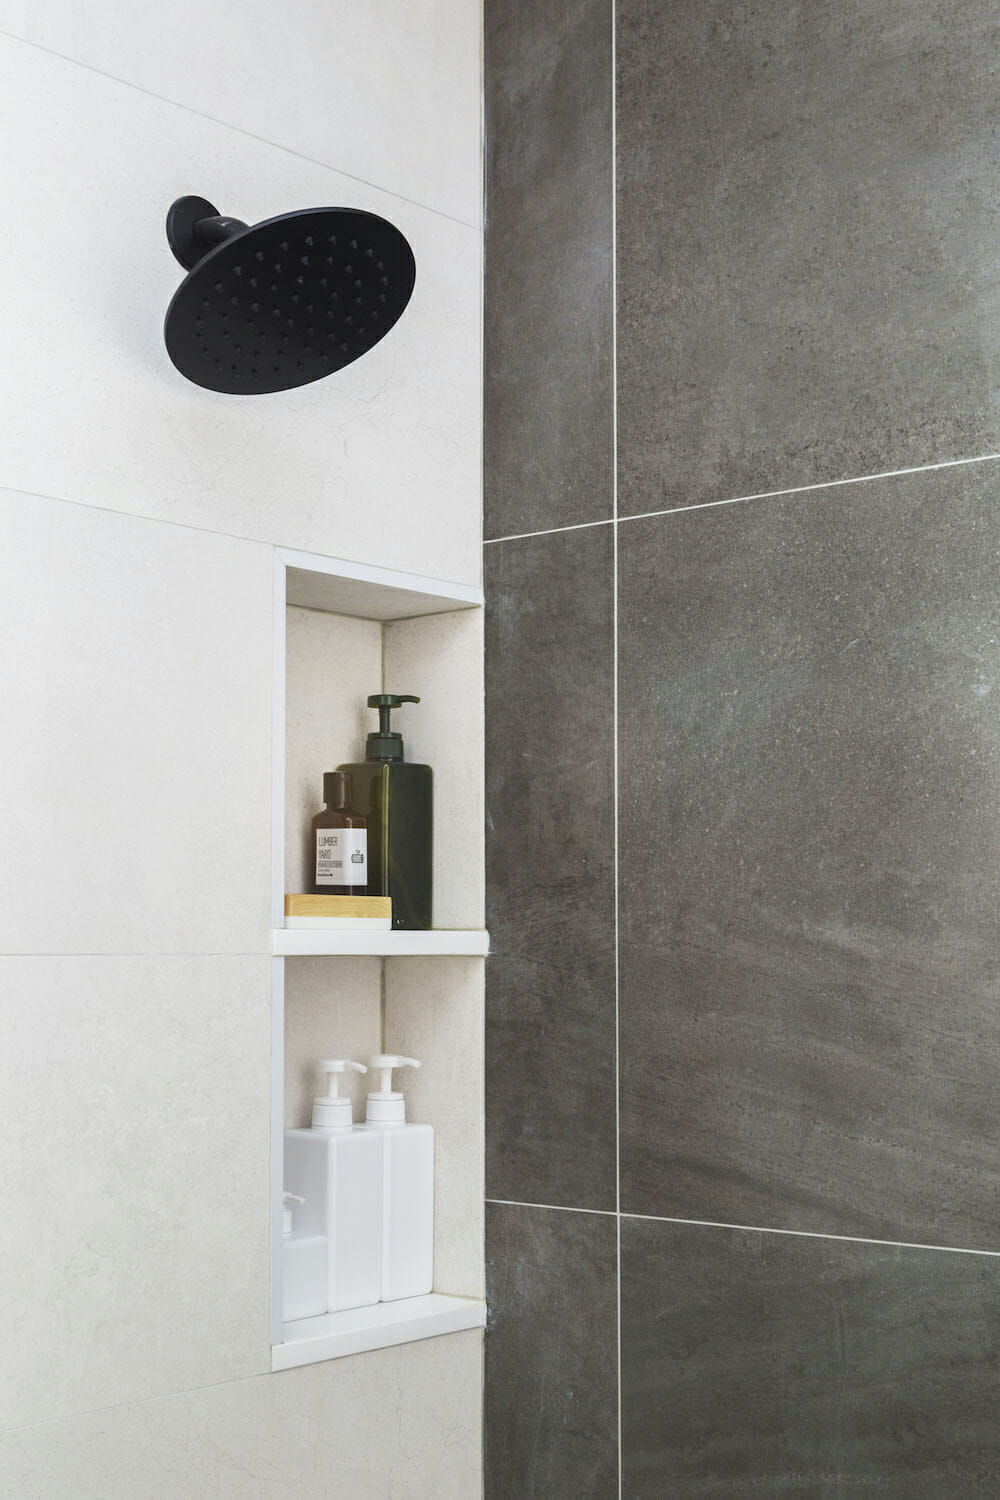 recessed shelves on off white wall and black shower head and dark gray tiles on adjacent wall after renovation